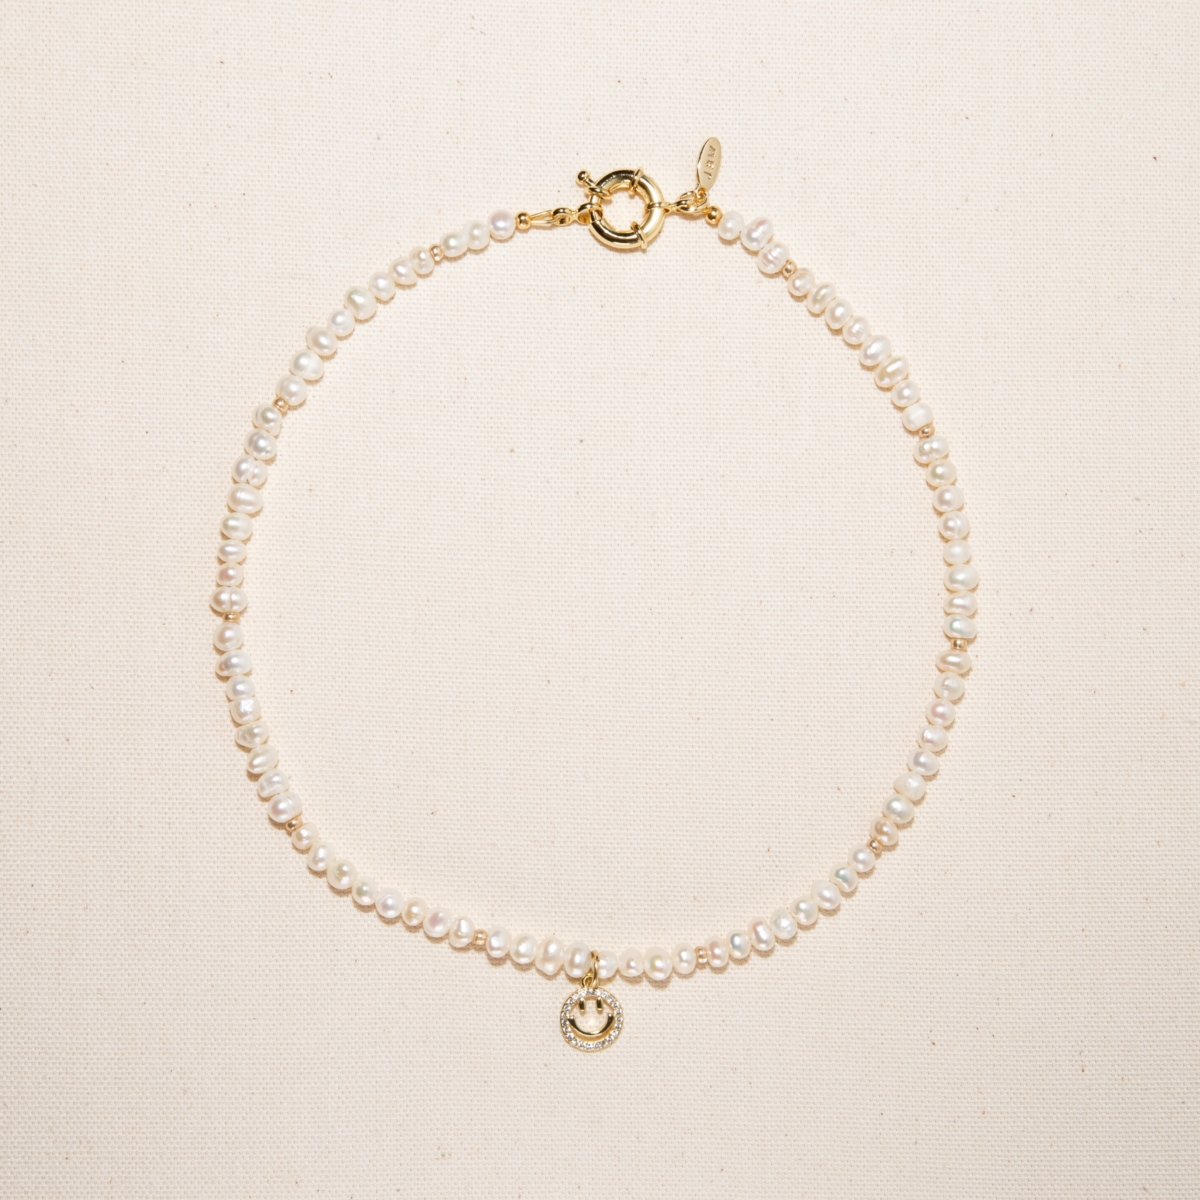 JOEY BABY 18K GOLD PLATED FRESHWATER PEARLS WITH SMILEY FACE CHARM